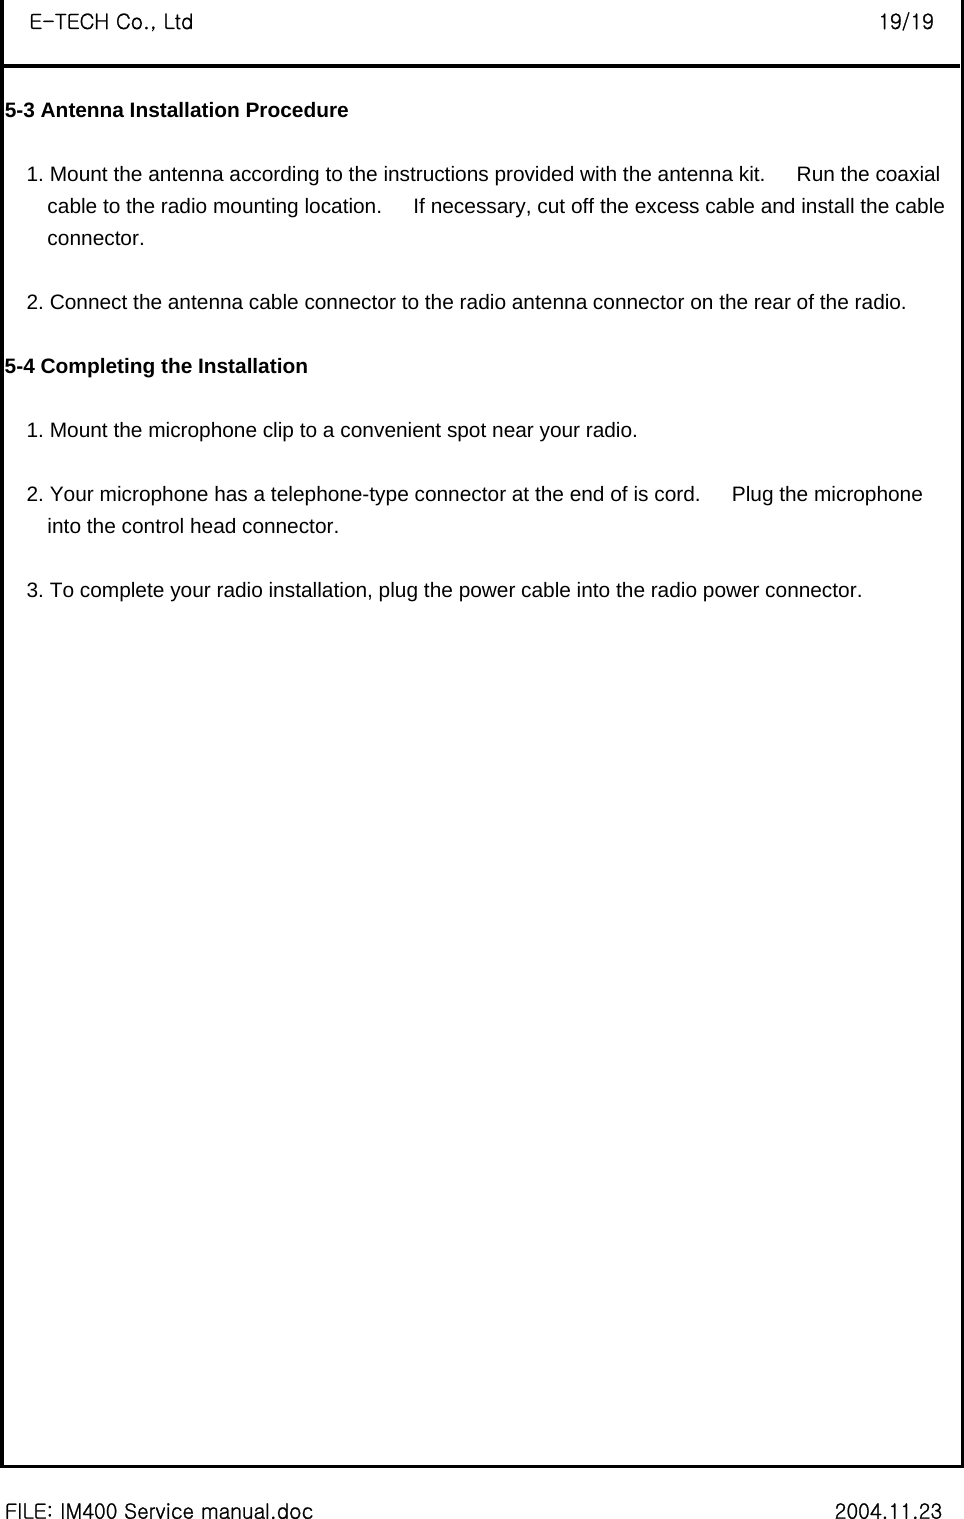  FILE: IM400 Service manual.doc                                                        2004.11.23 E-TECH Co., Ltd                                                                   19/19 5-3 Antenna Installation Procedure  1. Mount the antenna according to the instructions provided with the antenna kit.   Run the coaxial  cable to the radio mounting location.      If necessary, cut off the excess cable and install the cable   connector.  2. Connect the antenna cable connector to the radio antenna connector on the rear of the radio.    5-4 Completing the Installation  1. Mount the microphone clip to a convenient spot near your radio.  2. Your microphone has a telephone-type connector at the end of is cord.      Plug the microphone   into the control head connector.  3. To complete your radio installation, plug the power cable into the radio power connector.                              